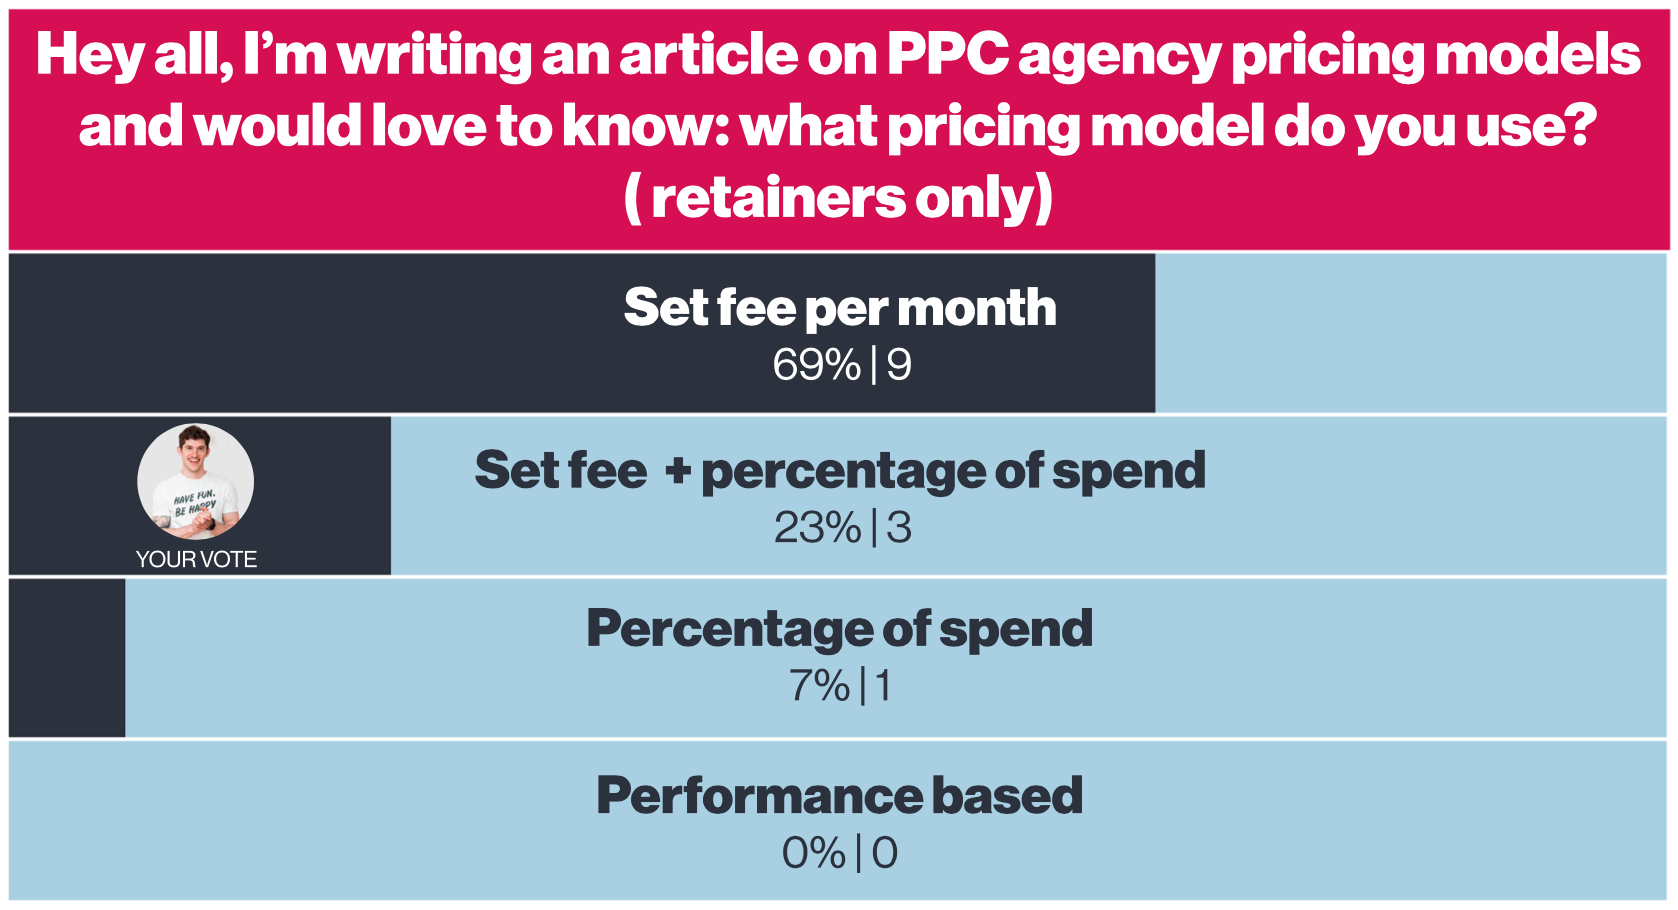 Results of pricing model poll showing 69% of the respondents prefer a set fee